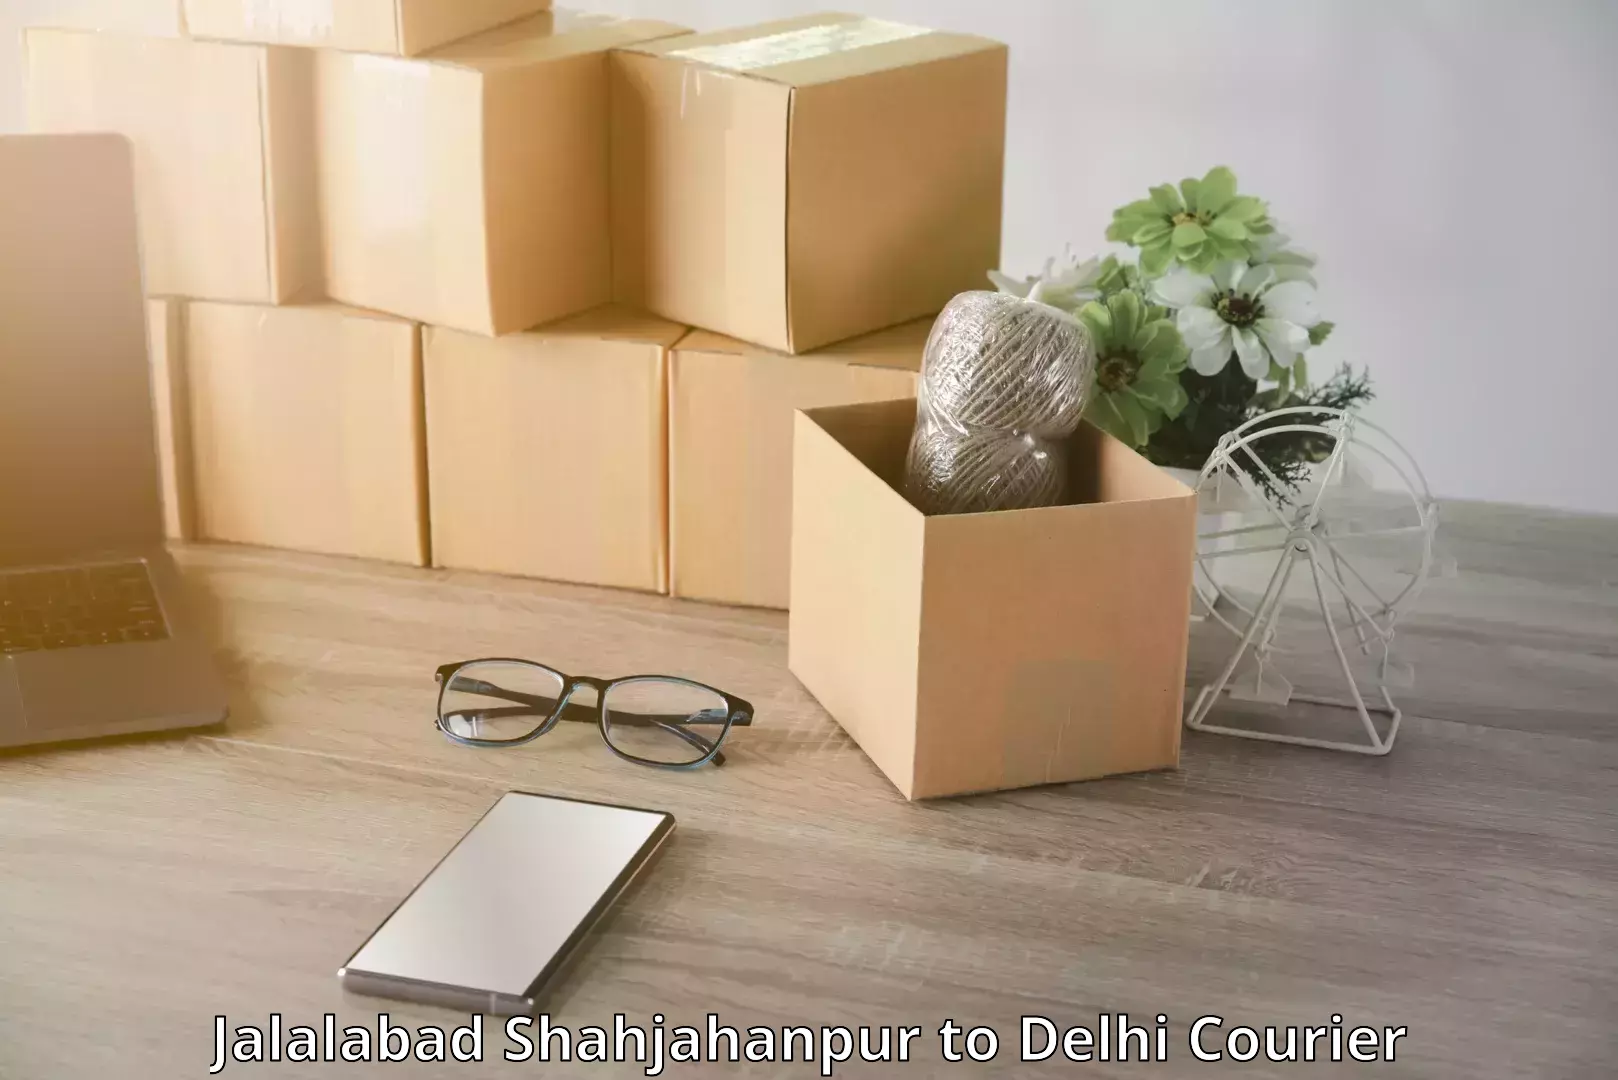 Luggage shipment specialists in Jalalabad Shahjahanpur to Delhi